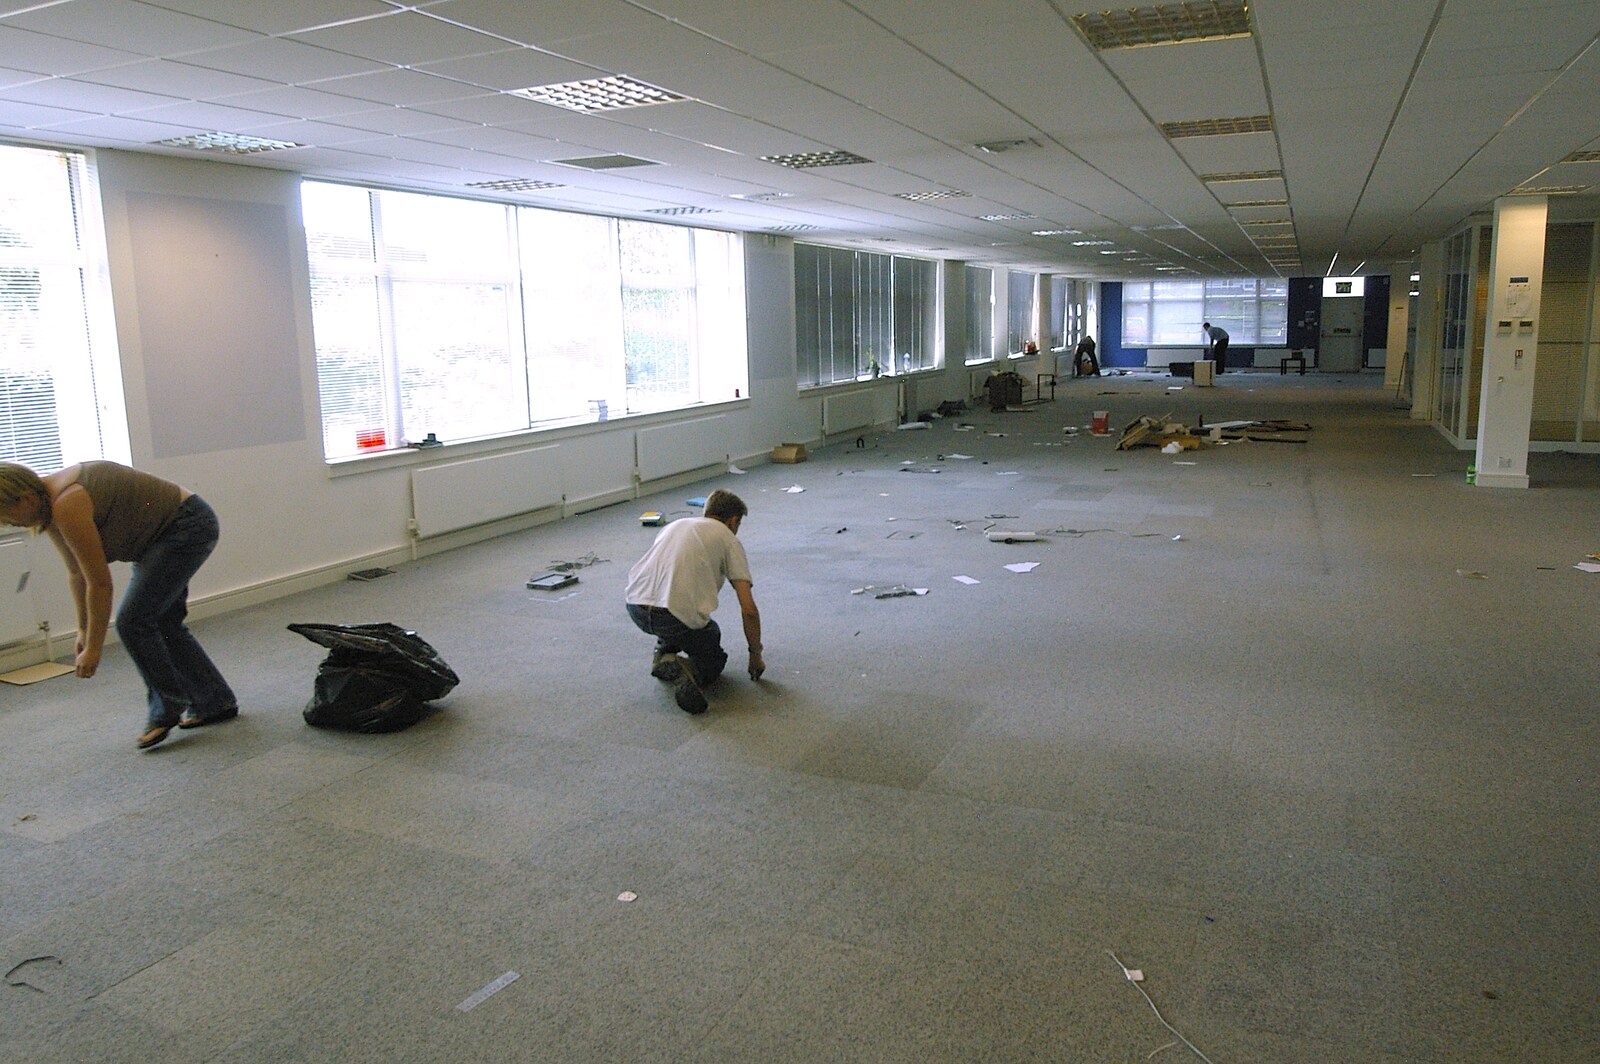 The next day, the old office is almost empty from Qualcomm Moves Offices, Milton Road, Cambridge - 26th July 2006